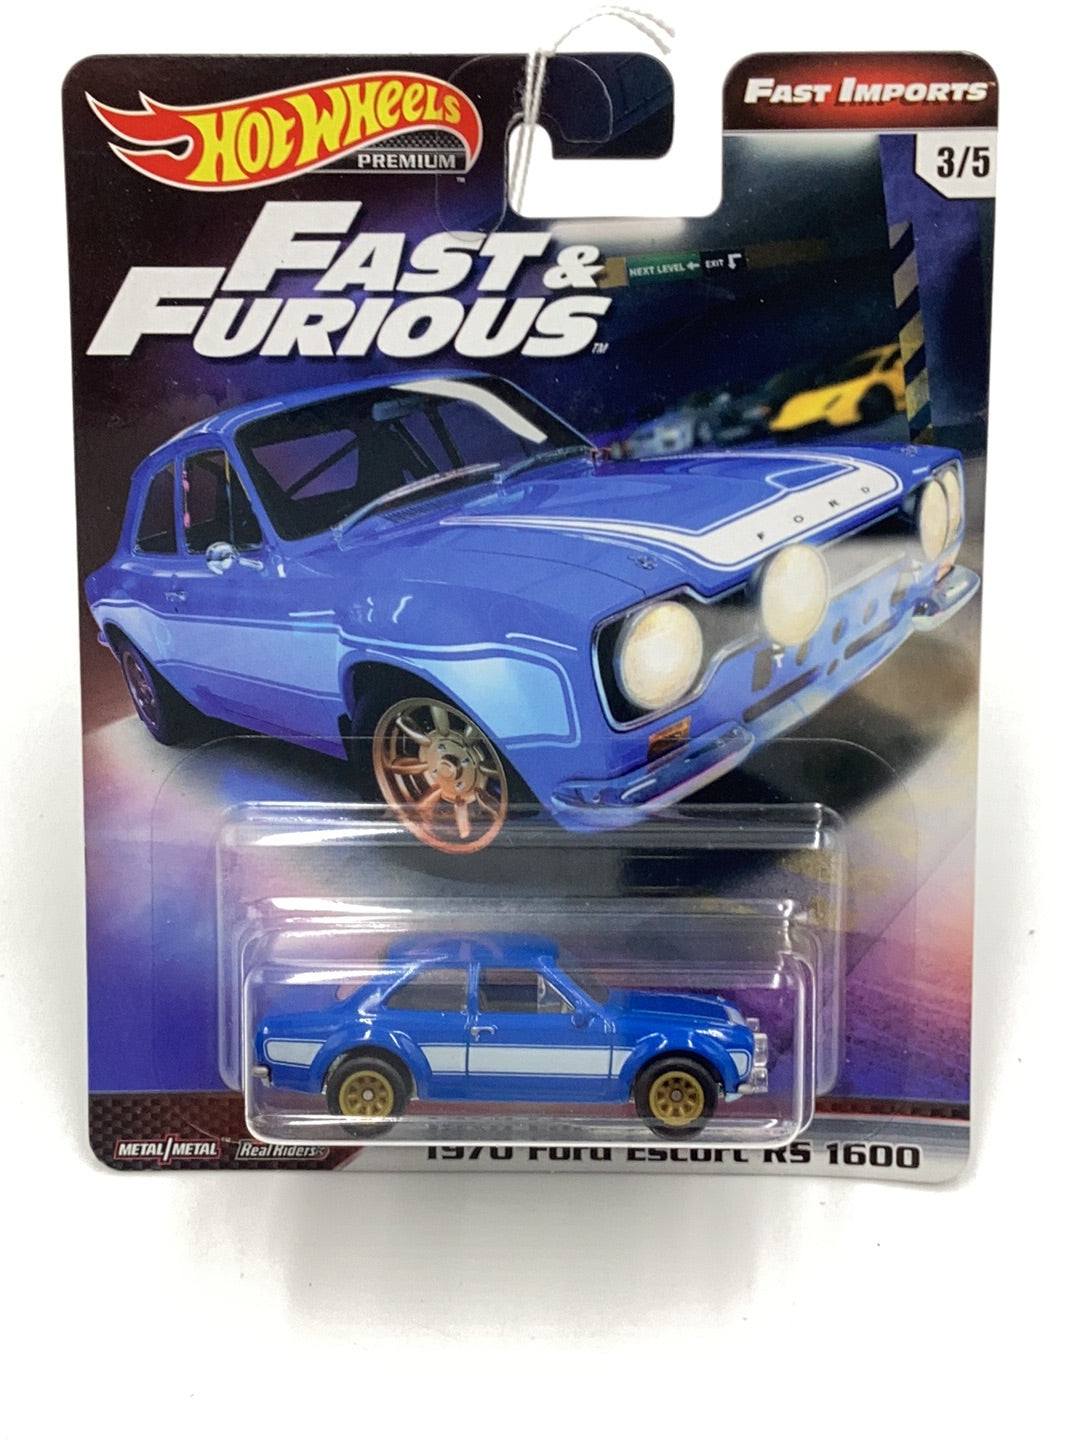 Hot Wheels fast and furious Fast Imports 3/5 1970 Ford Escort RS 1600 247H